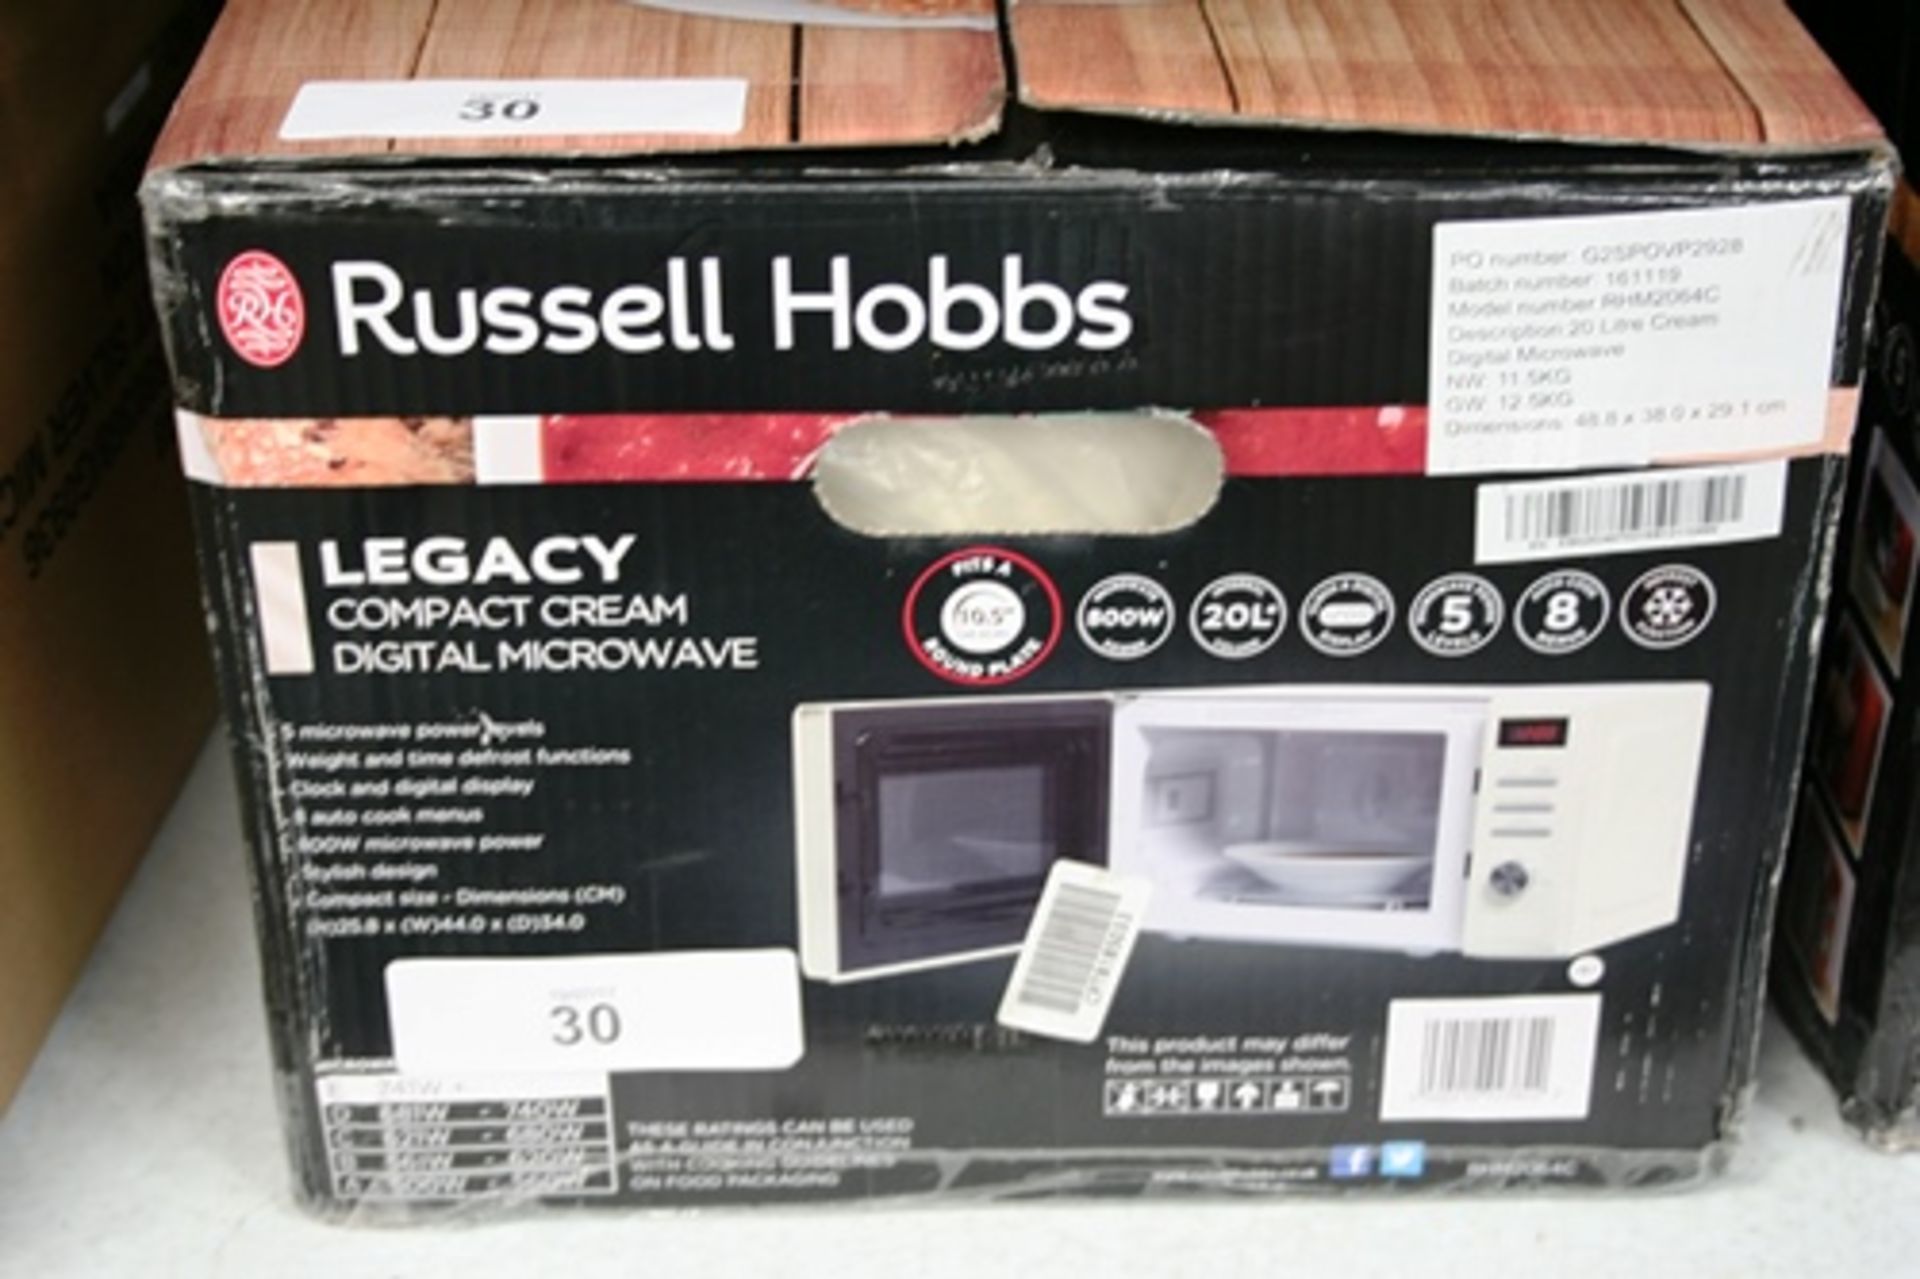 Russell Hobbs Legacy compact cream microwave, 800W, 20ltr, 240V, model RHM2064C - New in box, box